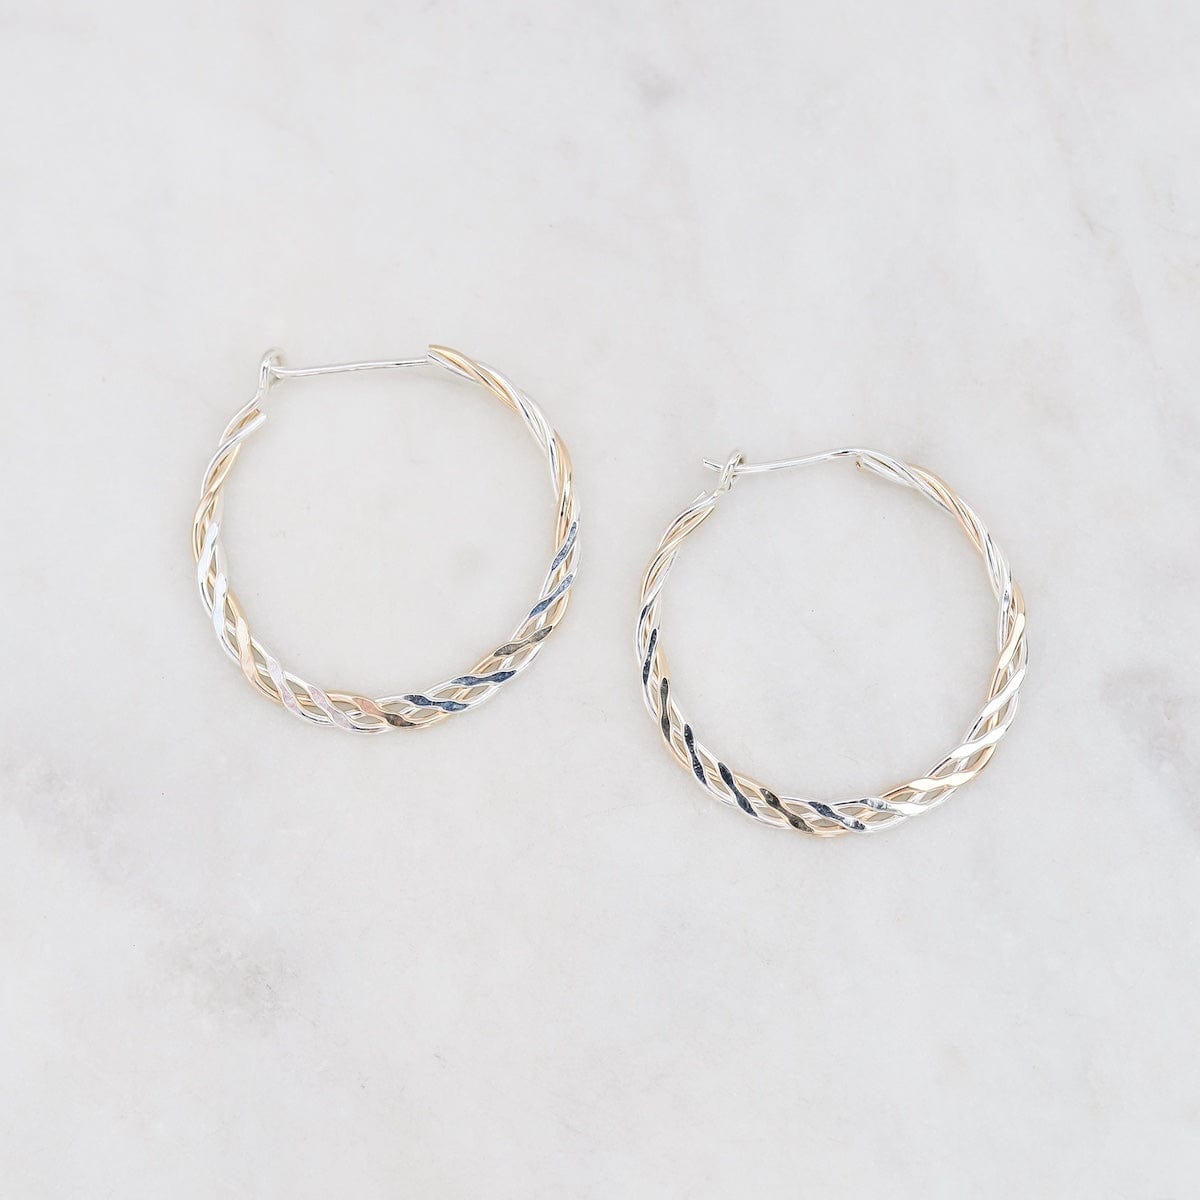 EAR-GF Mixed Sterling Silver & Gold Filled Braided Hoops - Small